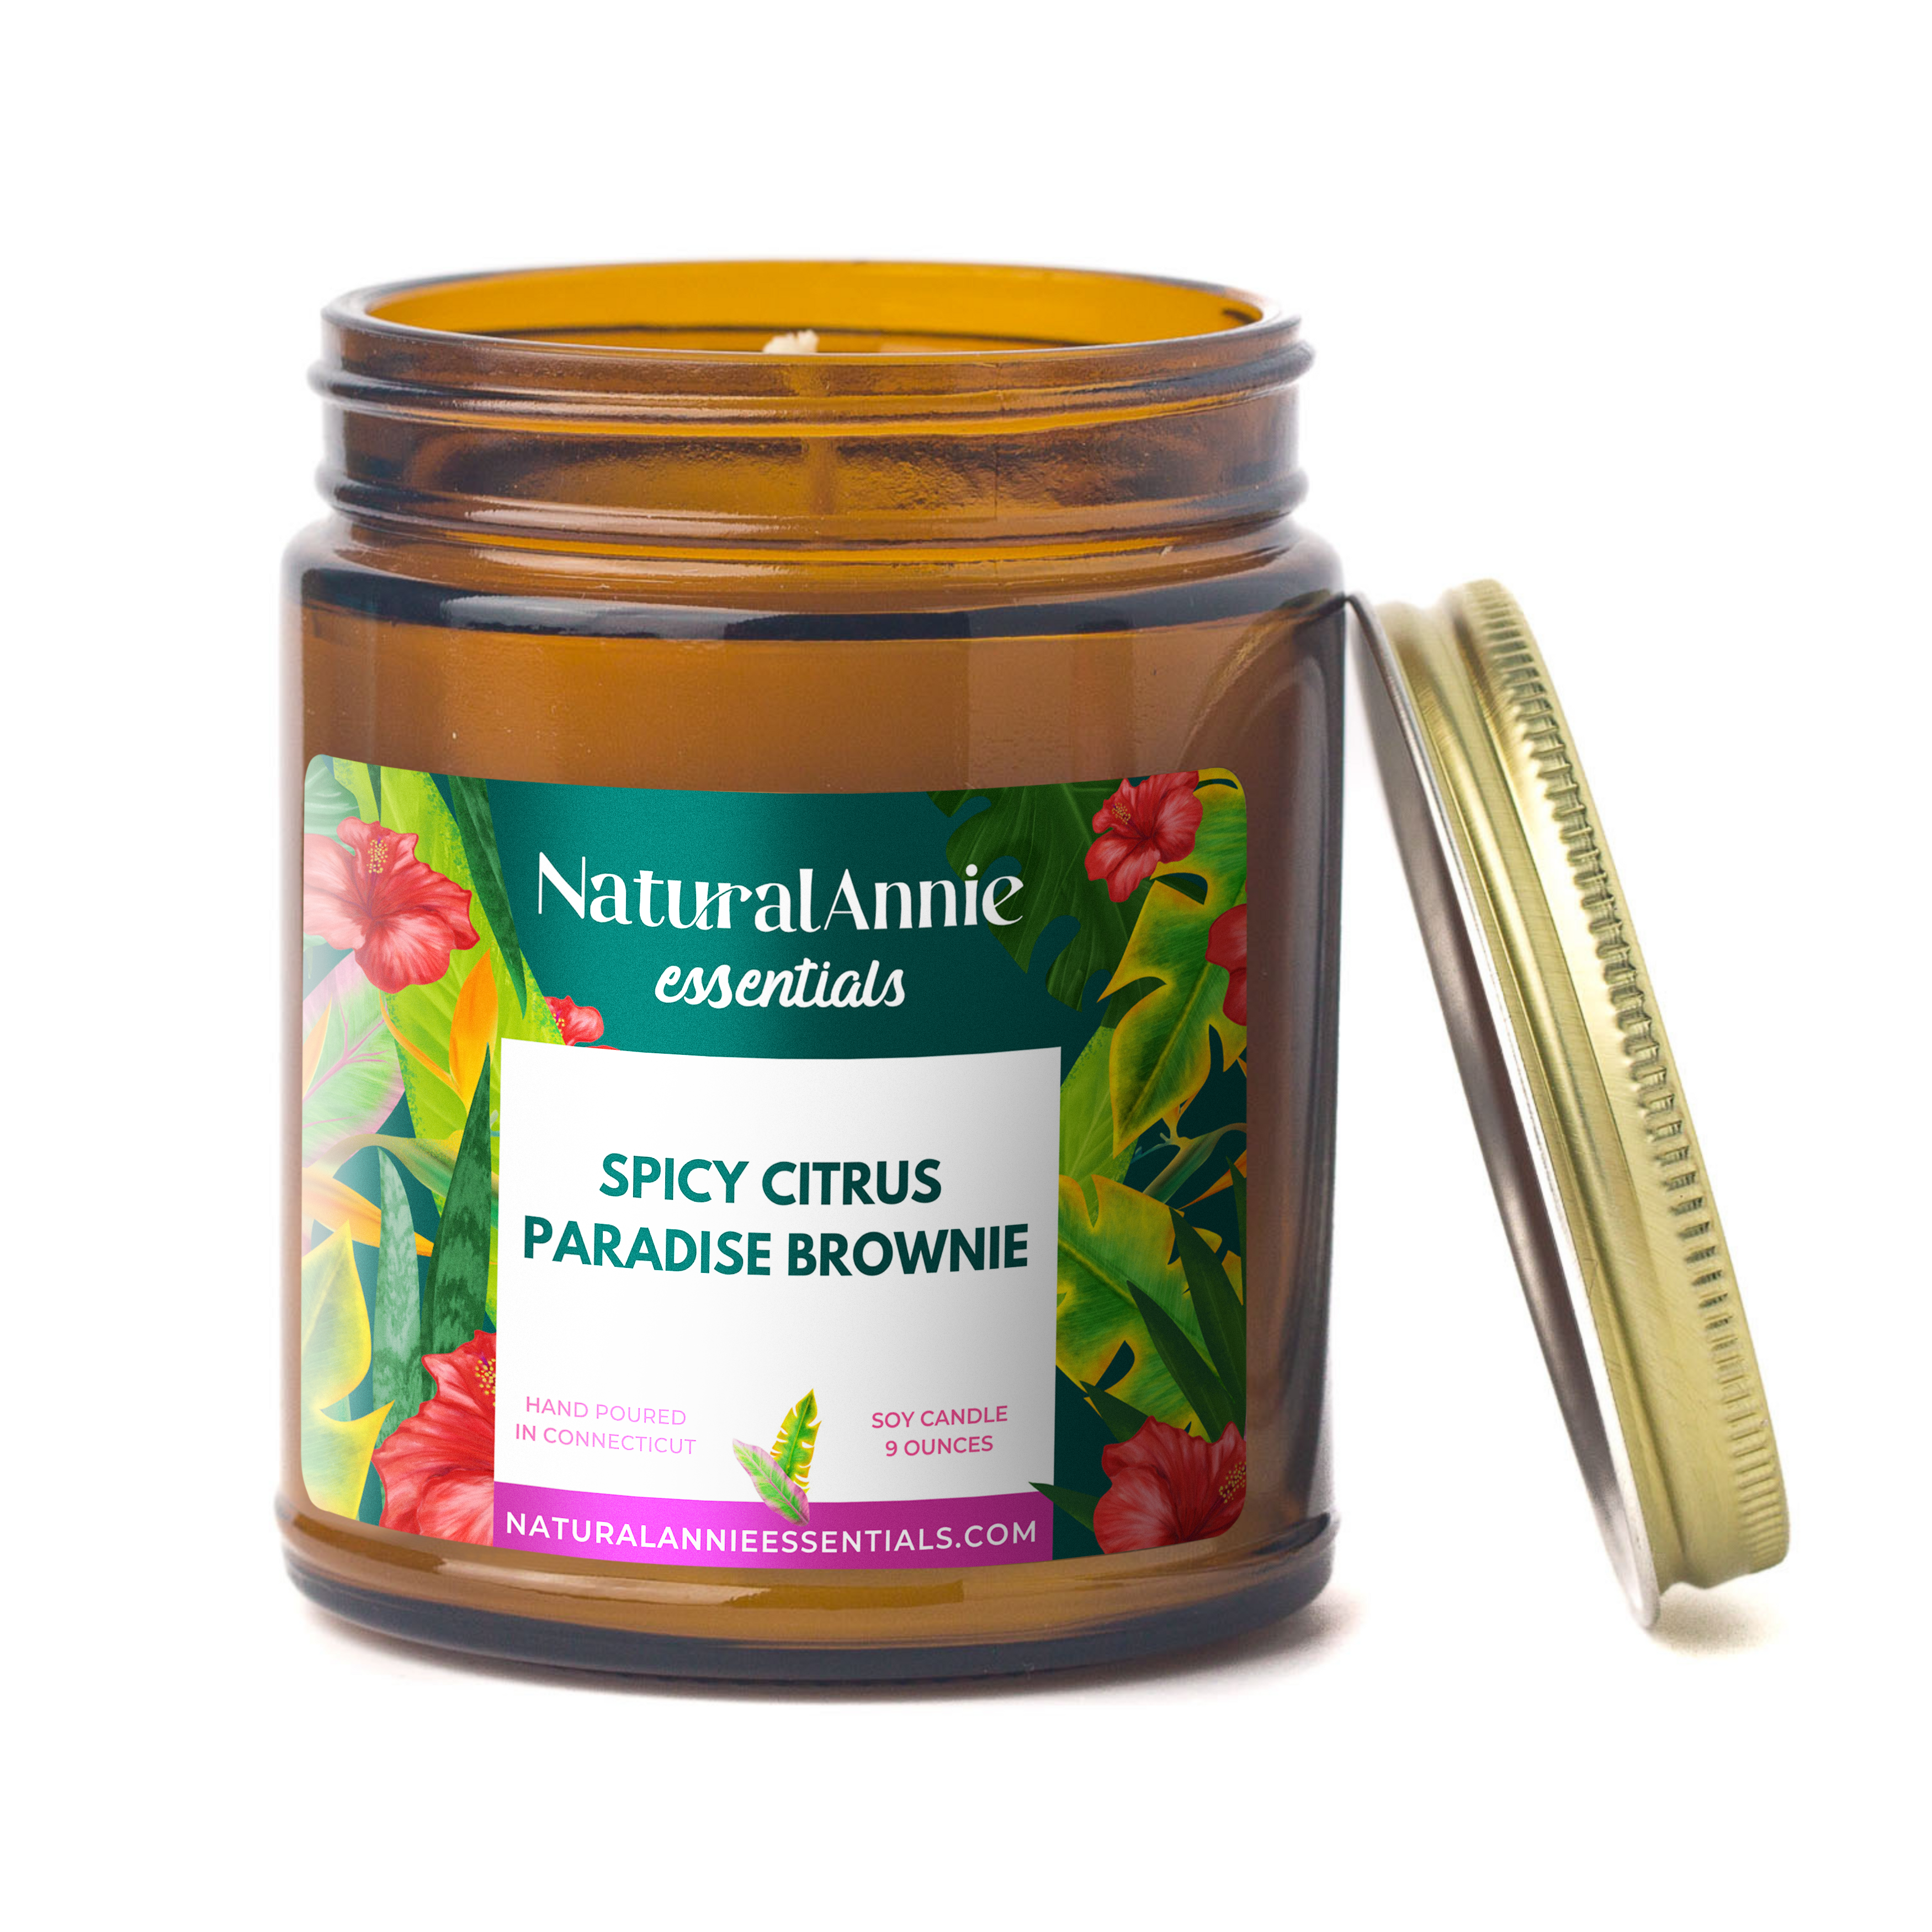 Spicy citrus paradise brownie 9 oz Scented Soy Candle